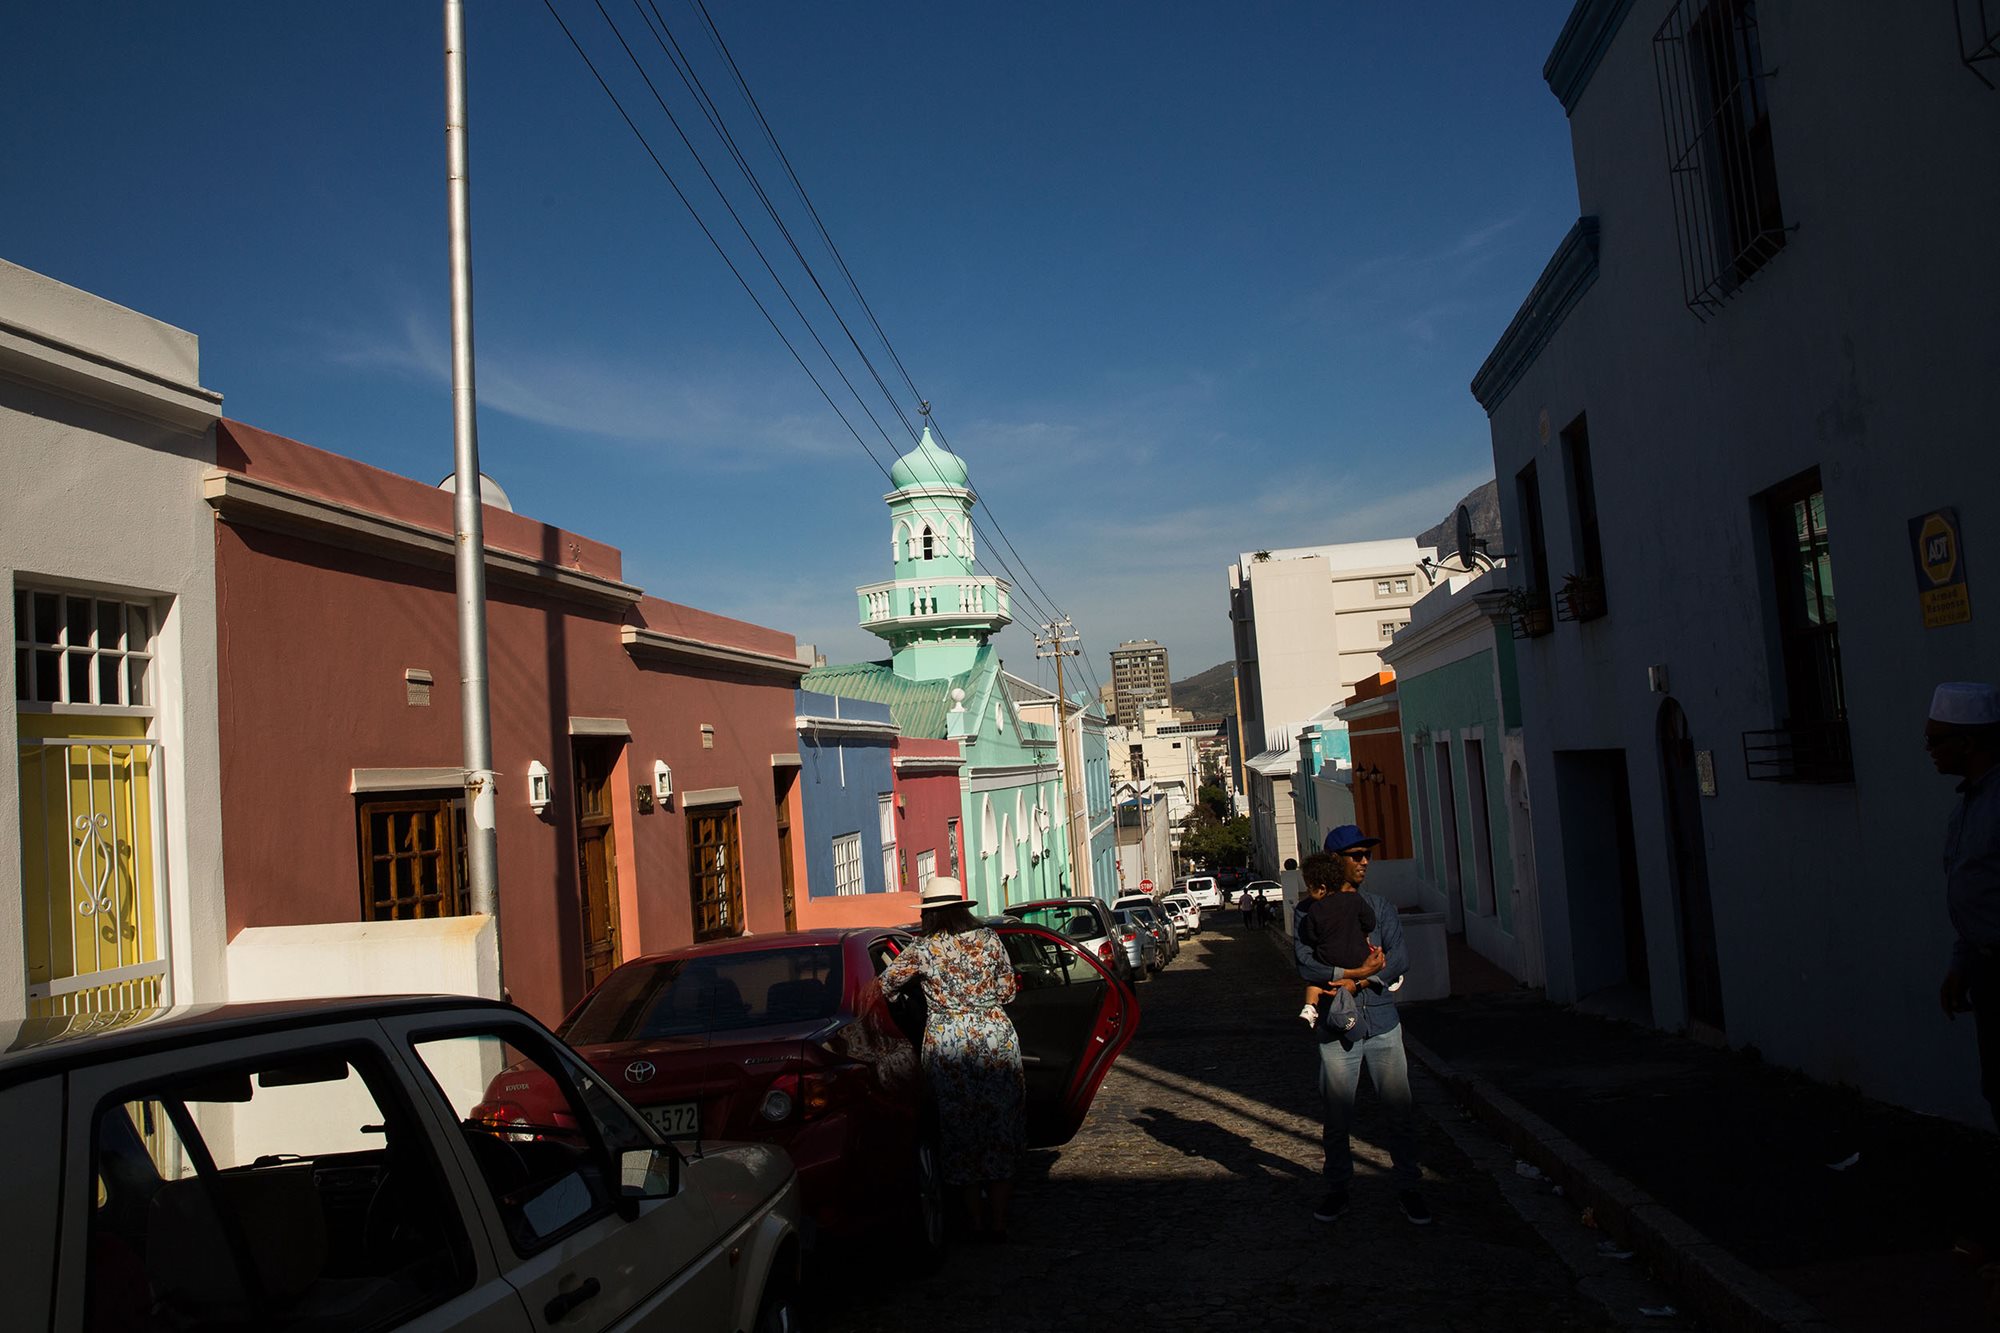 A local landmark and one of many historical buildings in Bo-Kaap, the minaret of the Masjid Boorhaanol Islam rises amid the neighborhood&#39;s colorful walls on Longmarket Street. Local leaders, including Minister of Arts and Culture Nathi Mthethwa, are beginning the process of designating Bo-Kaap as a <span class="smallcaps">unesco</span> World Heritage Site.